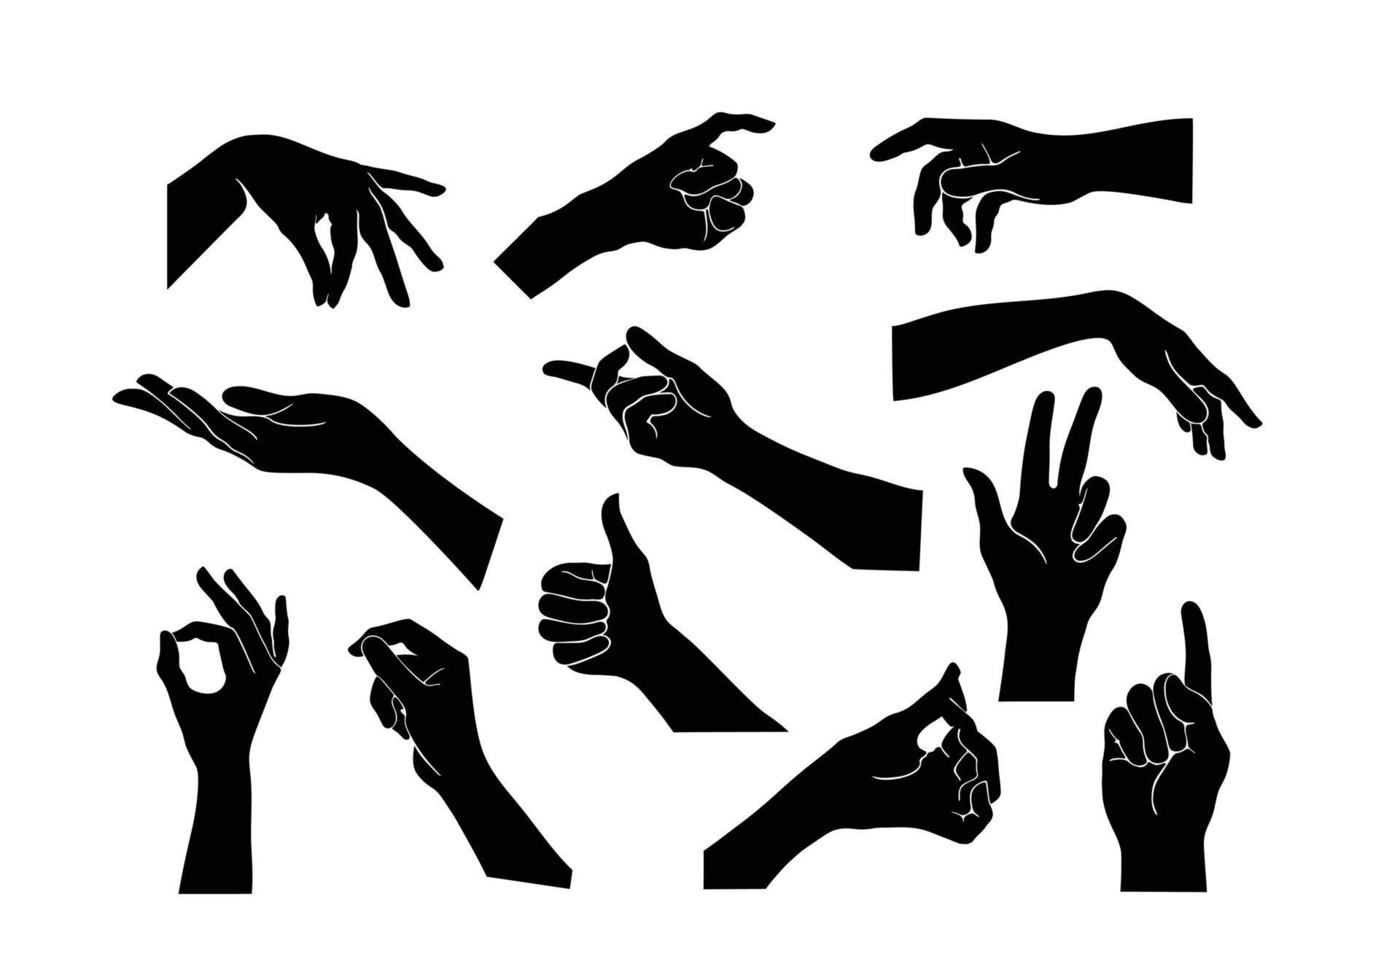 vector collection set of hand gestures. black hand gesture like a silhouette or shadow of hands. human body movement illustrations in black.